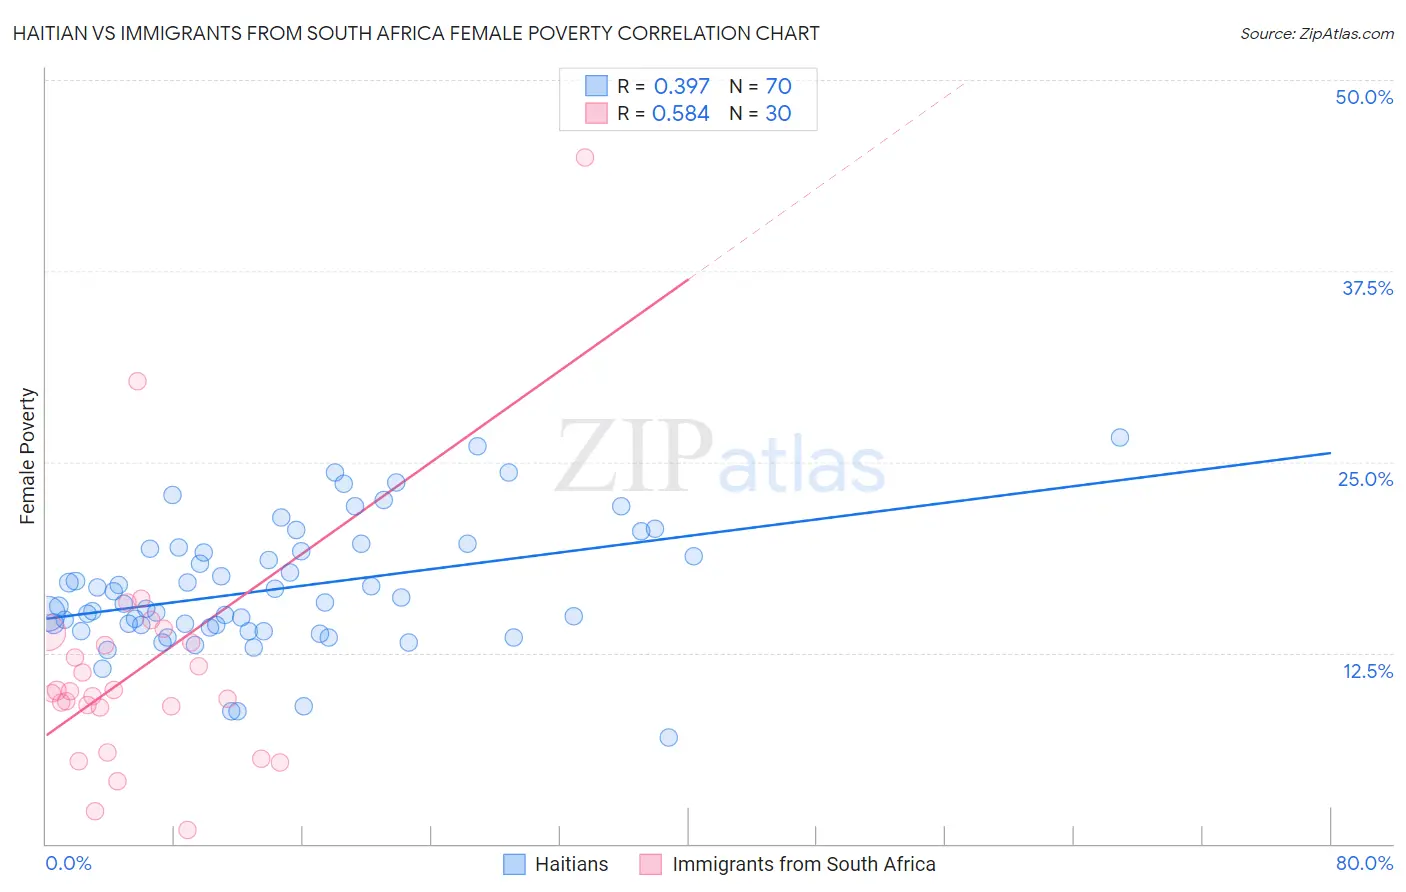 Haitian vs Immigrants from South Africa Female Poverty